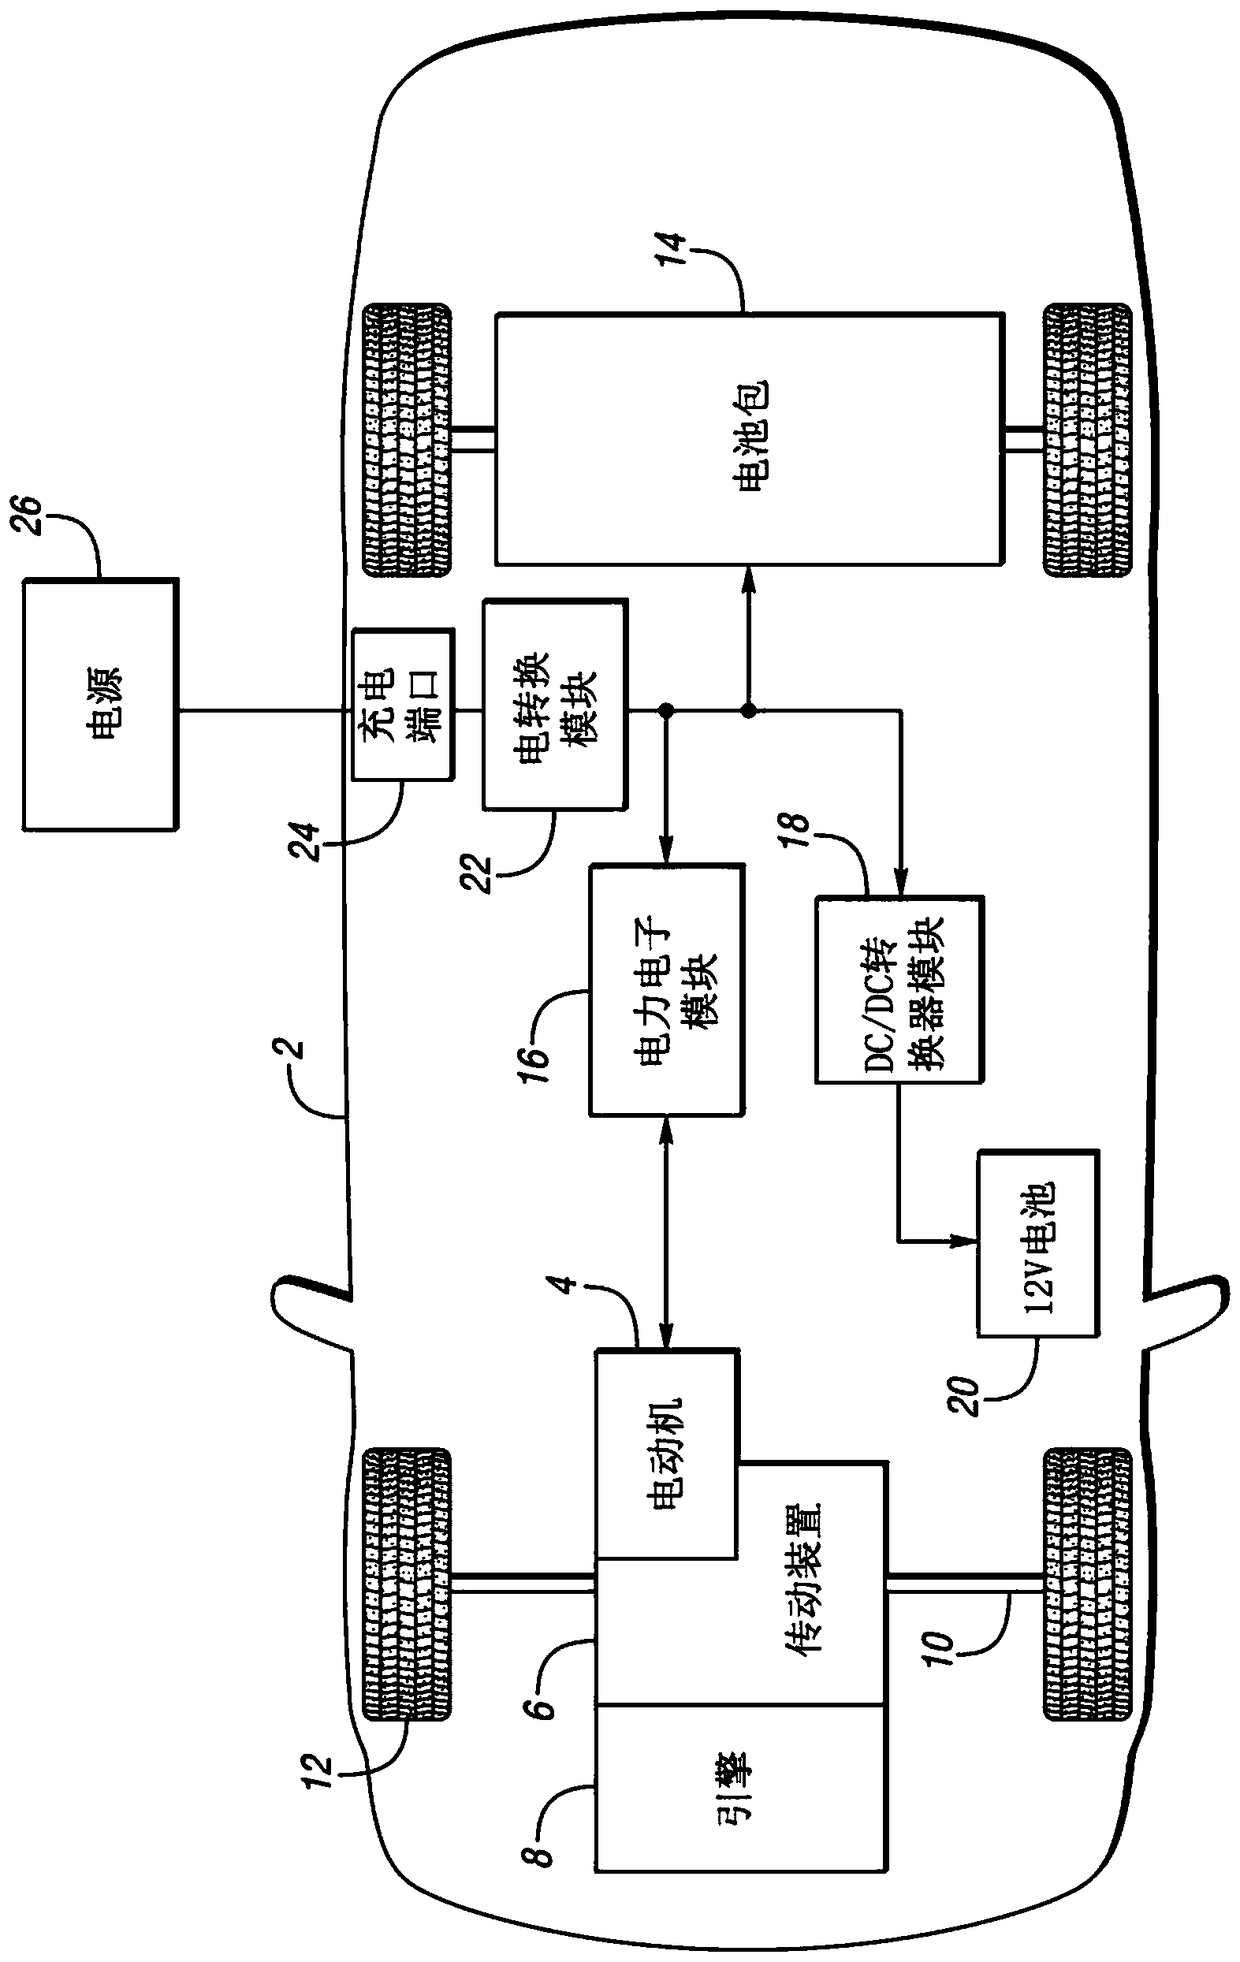 Isolation Monitor performance tools and methods for testing Isolation Monitors